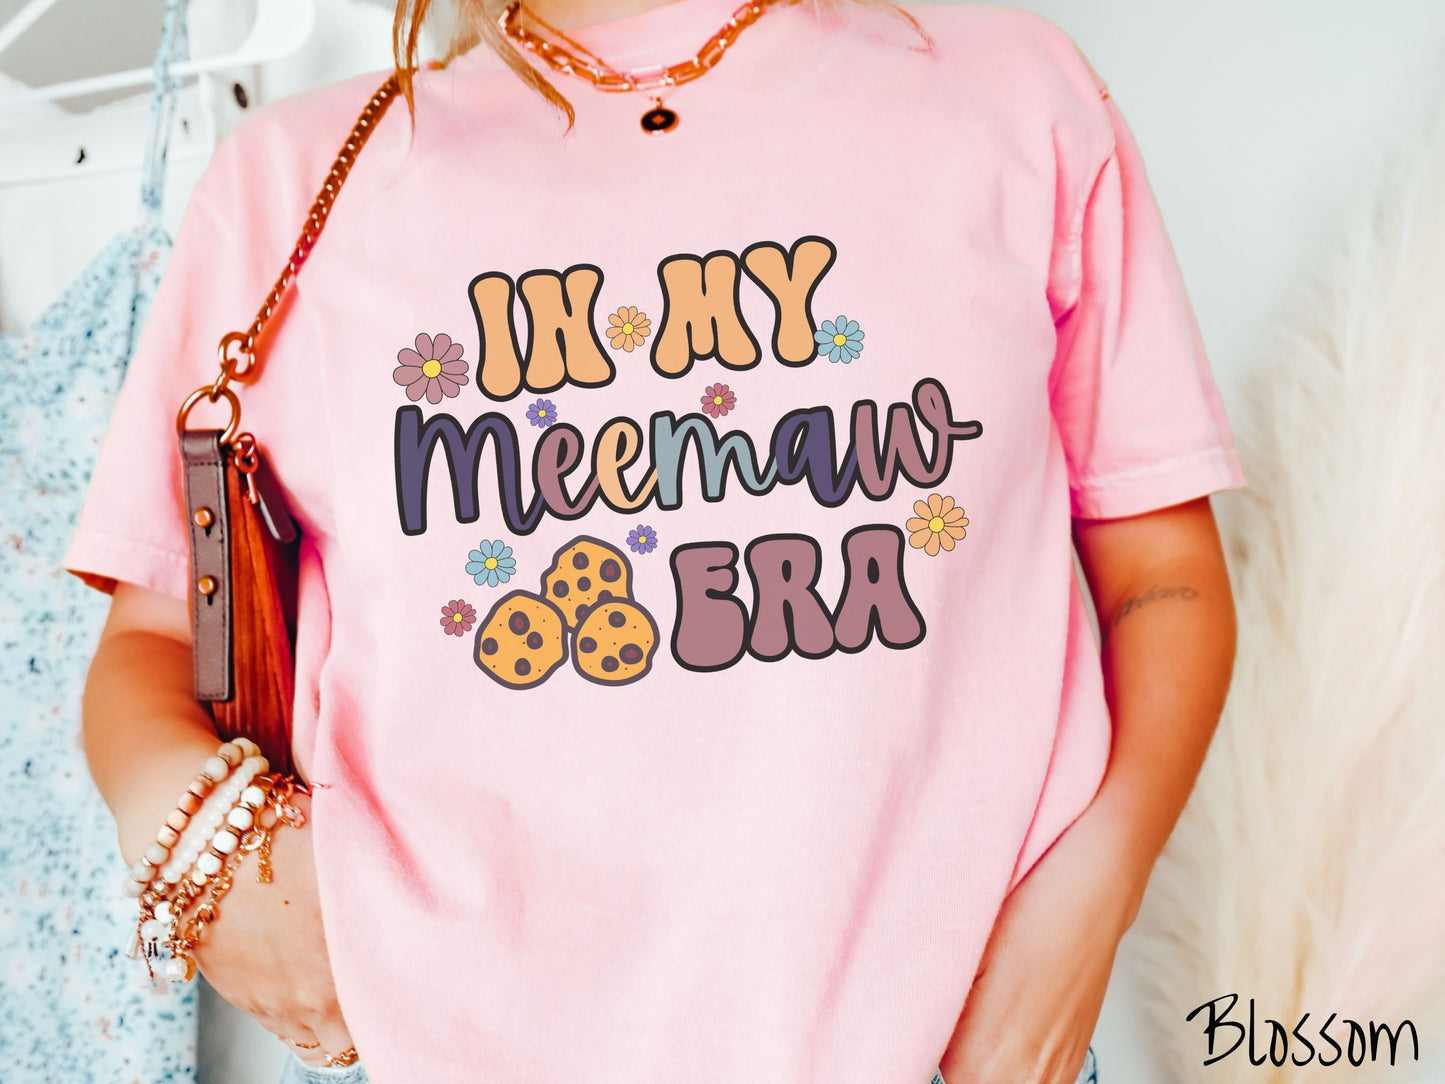 A woman wearing a cute blossom colored sweatshirt with text on the front saying In My Meemaw Era, with flowers and chocolate chip cookies mixed within the text.